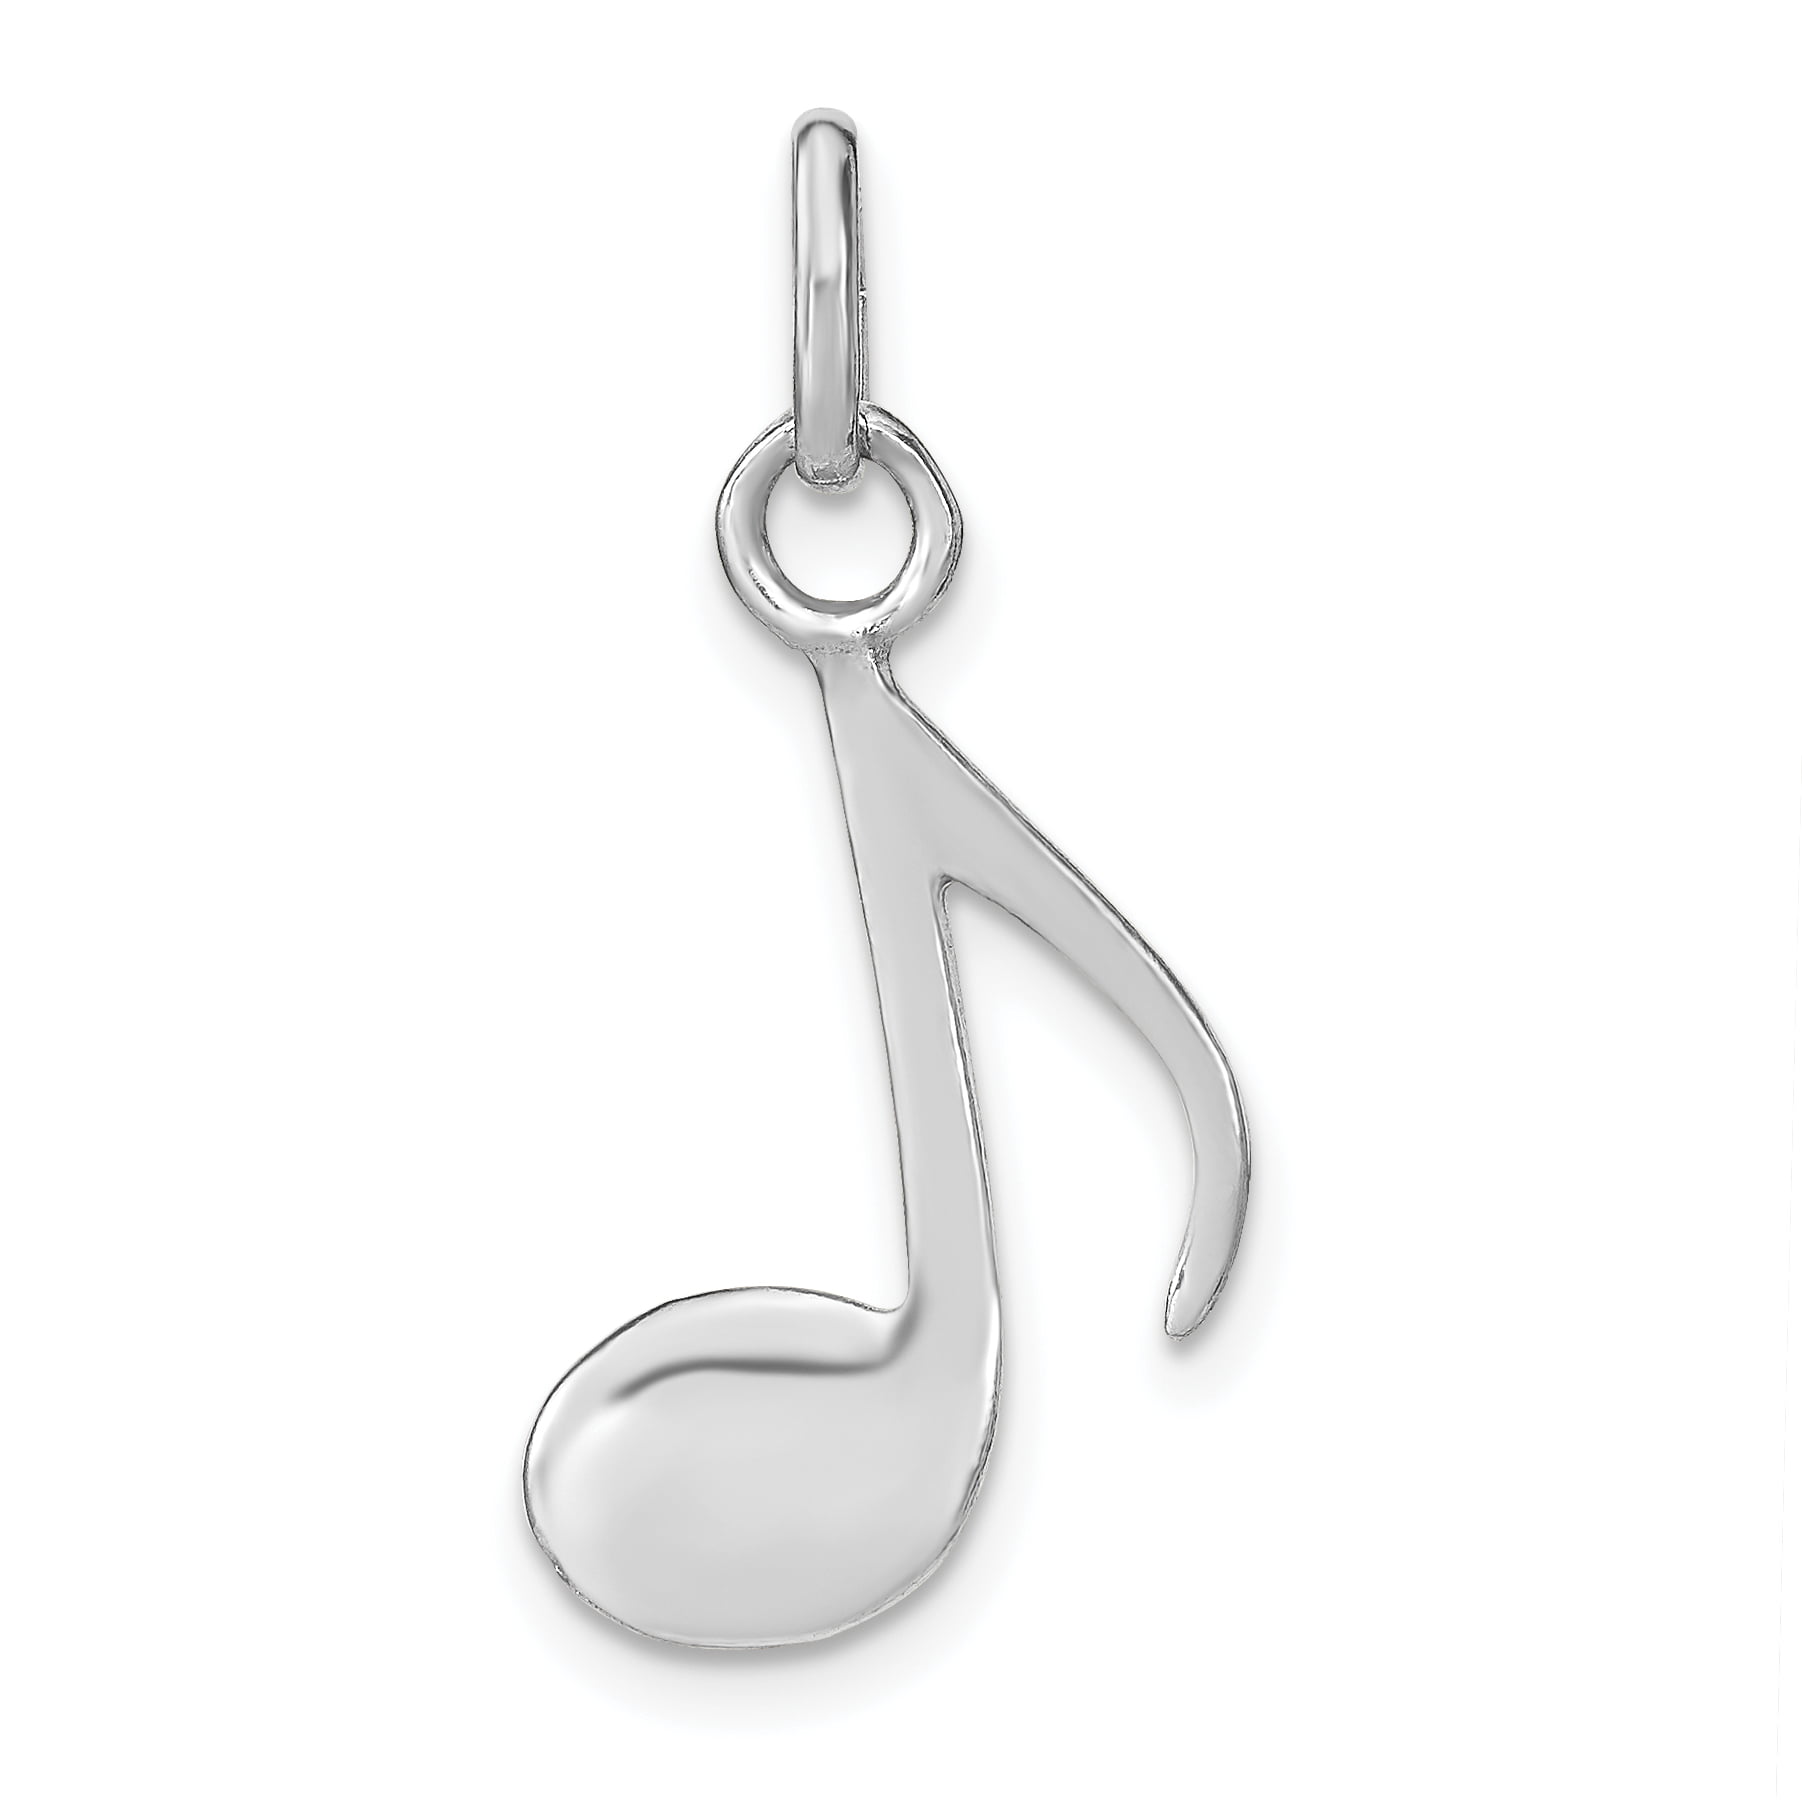 12mm x 22mm Solid 925 Sterling Silver Music Note Pendant Charm 